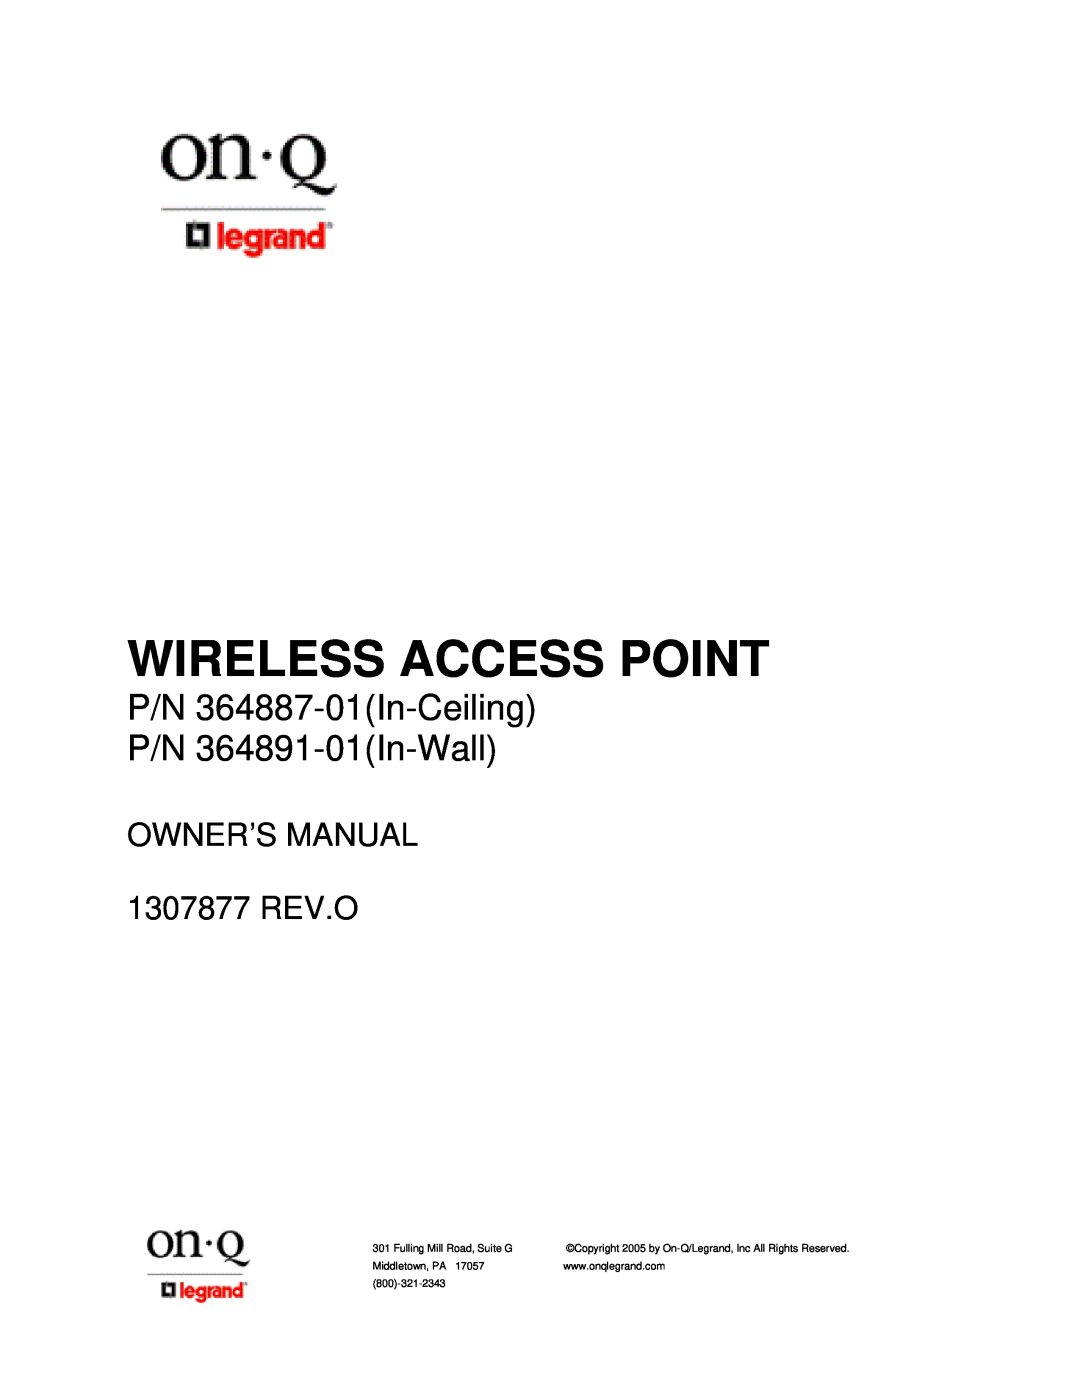 On-Q/Legrand 1307877 owner manual Wireless Access Point, P/N 364887-01In-Ceiling P/N 364891-01In-Wall, Page 